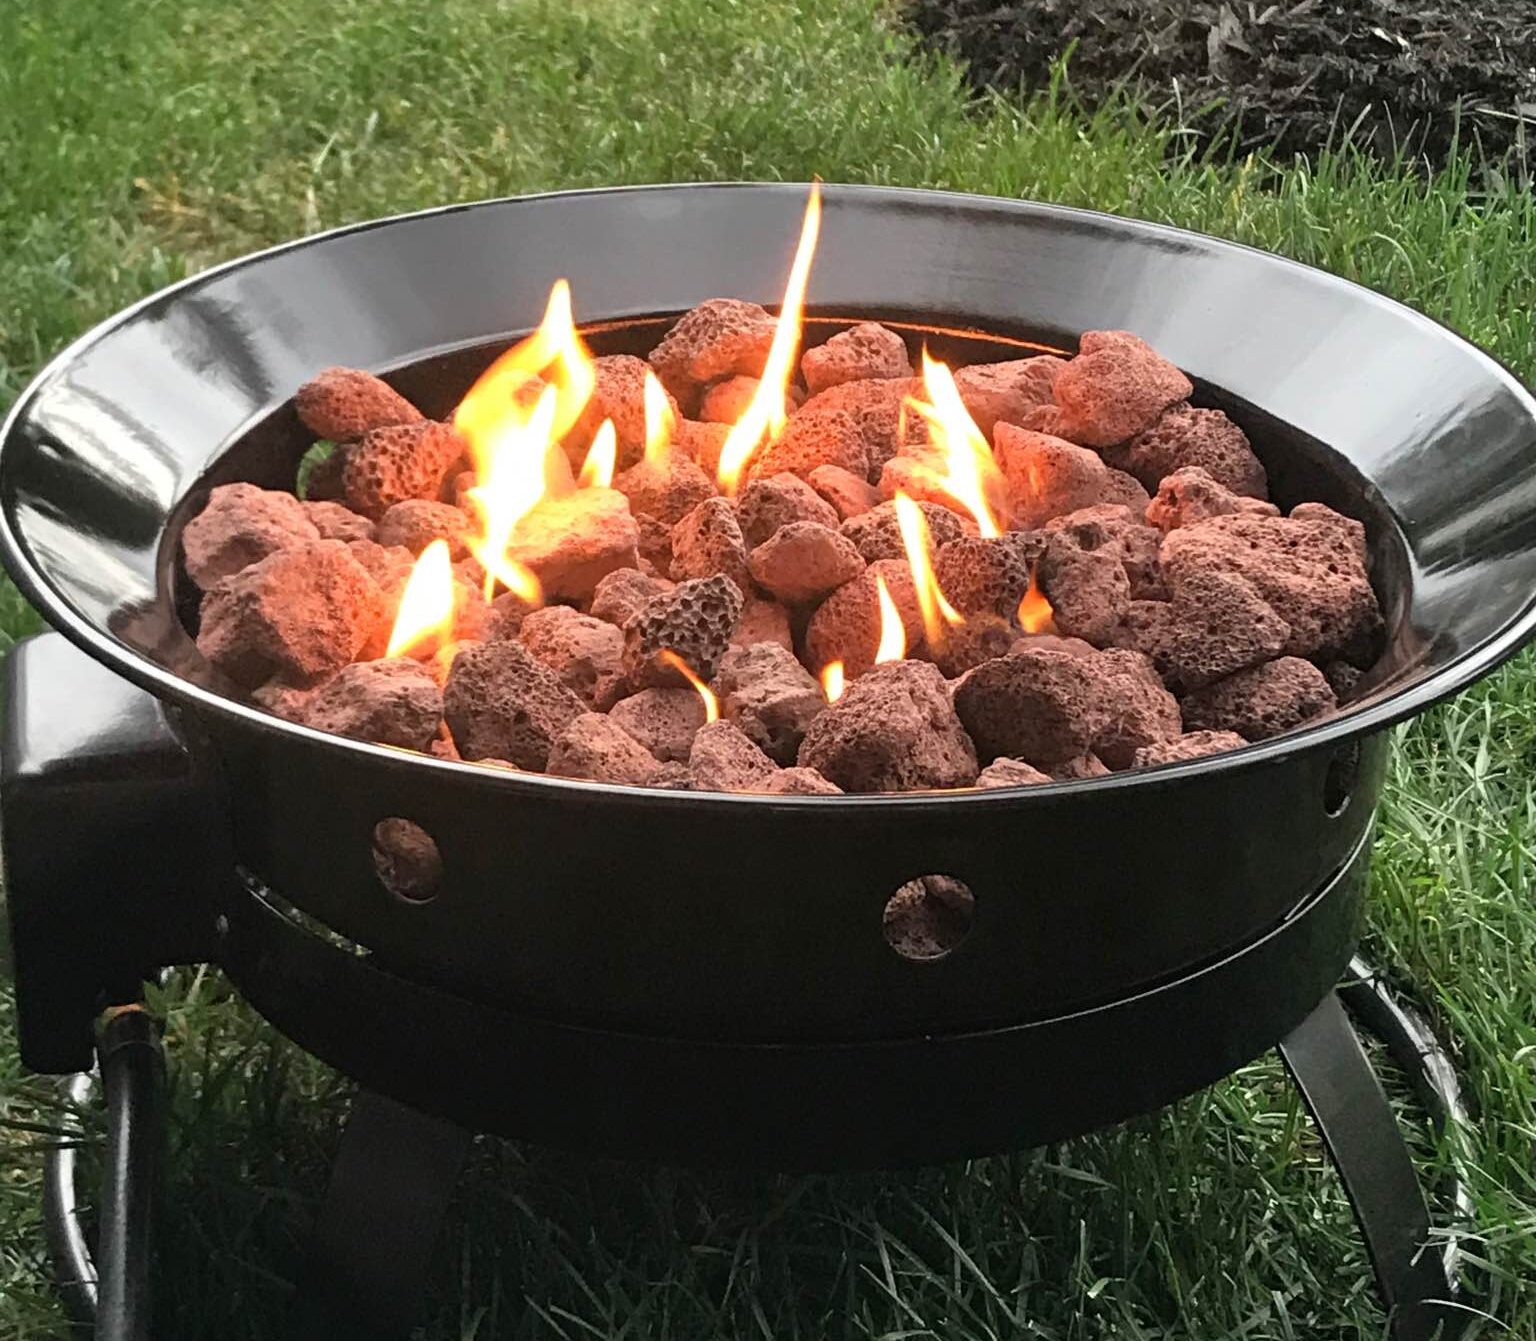 Portable Propane Fire Pits, Are Propane Fire Pits Legal